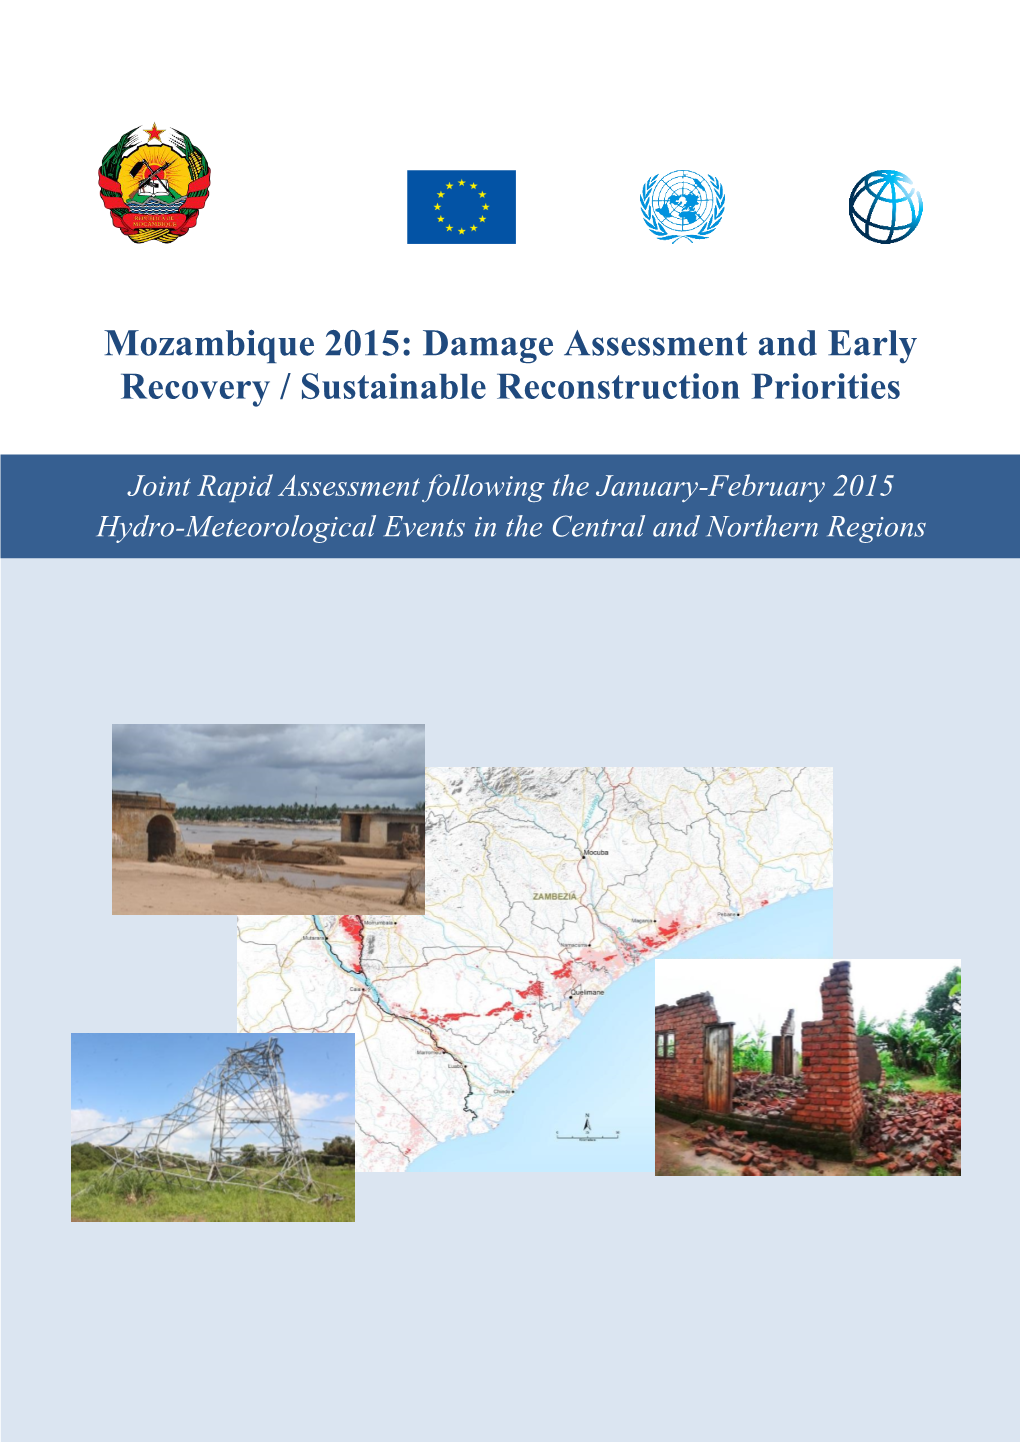 Mozambique 2015: Damage Assessment and Early Recovery / Sustainable Reconstruction Priorities